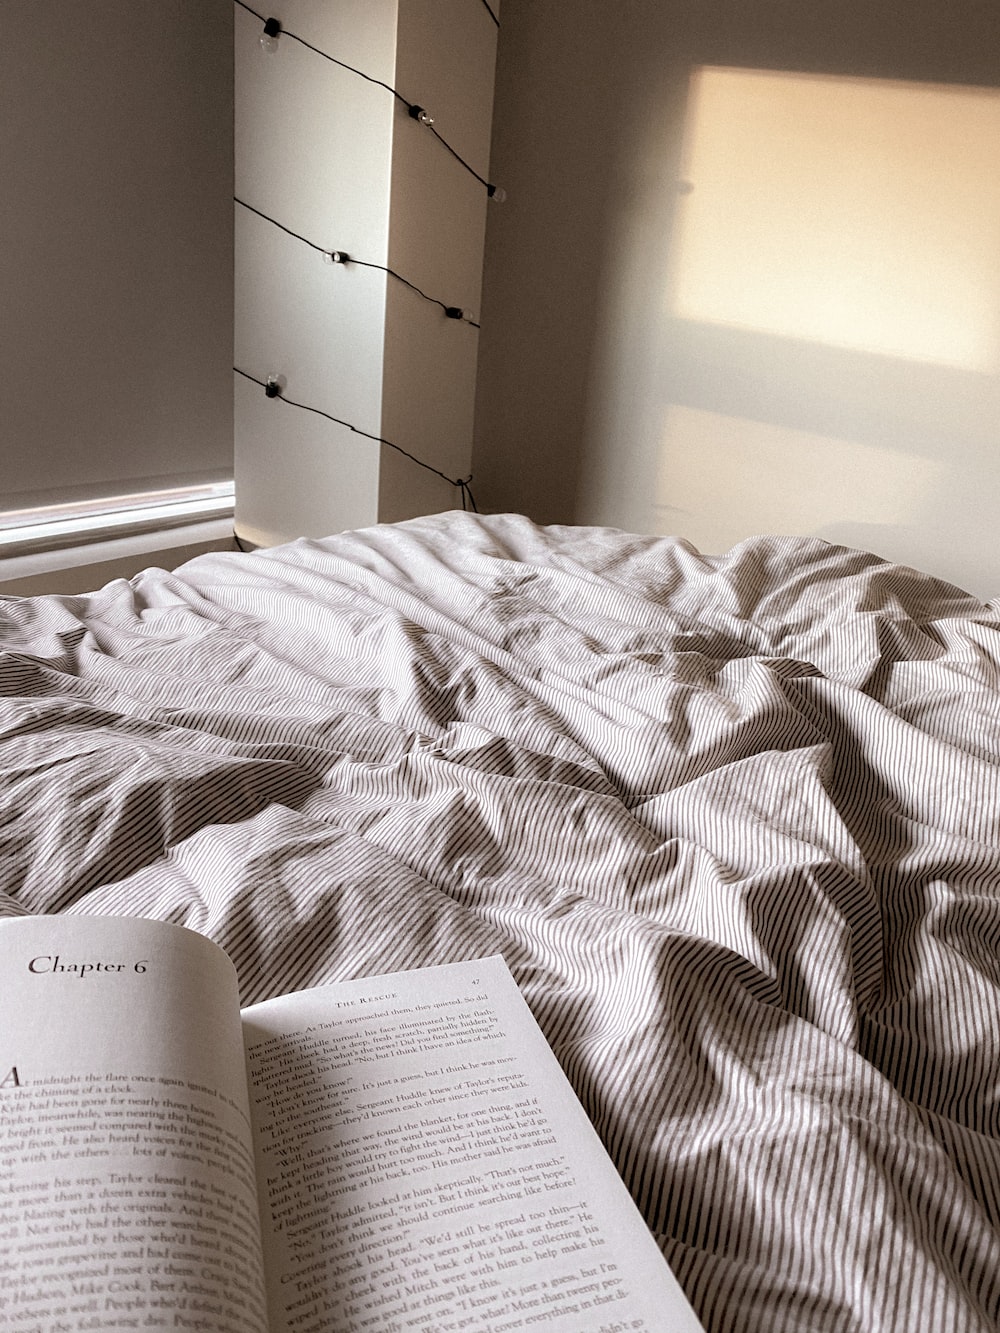 Should books be in bedroom?